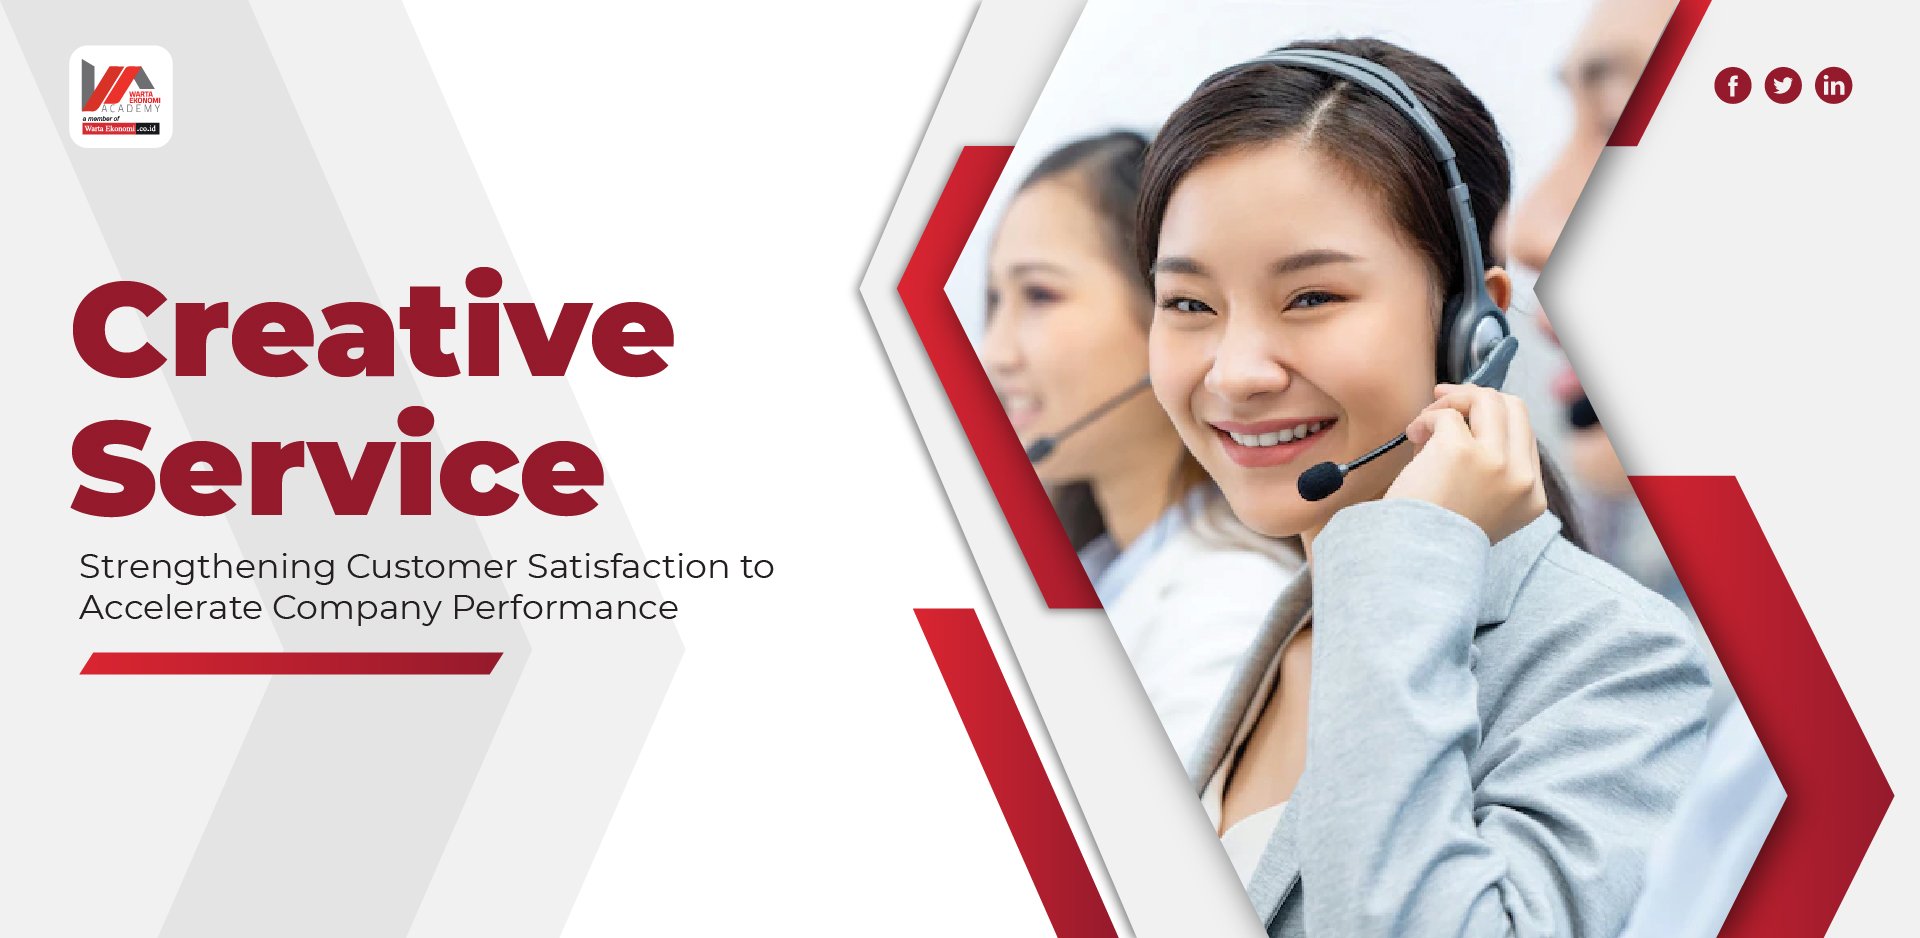 CREATIVE SERVICE “Strengthening Customer Satisfaction to Accelerate Company Performance”